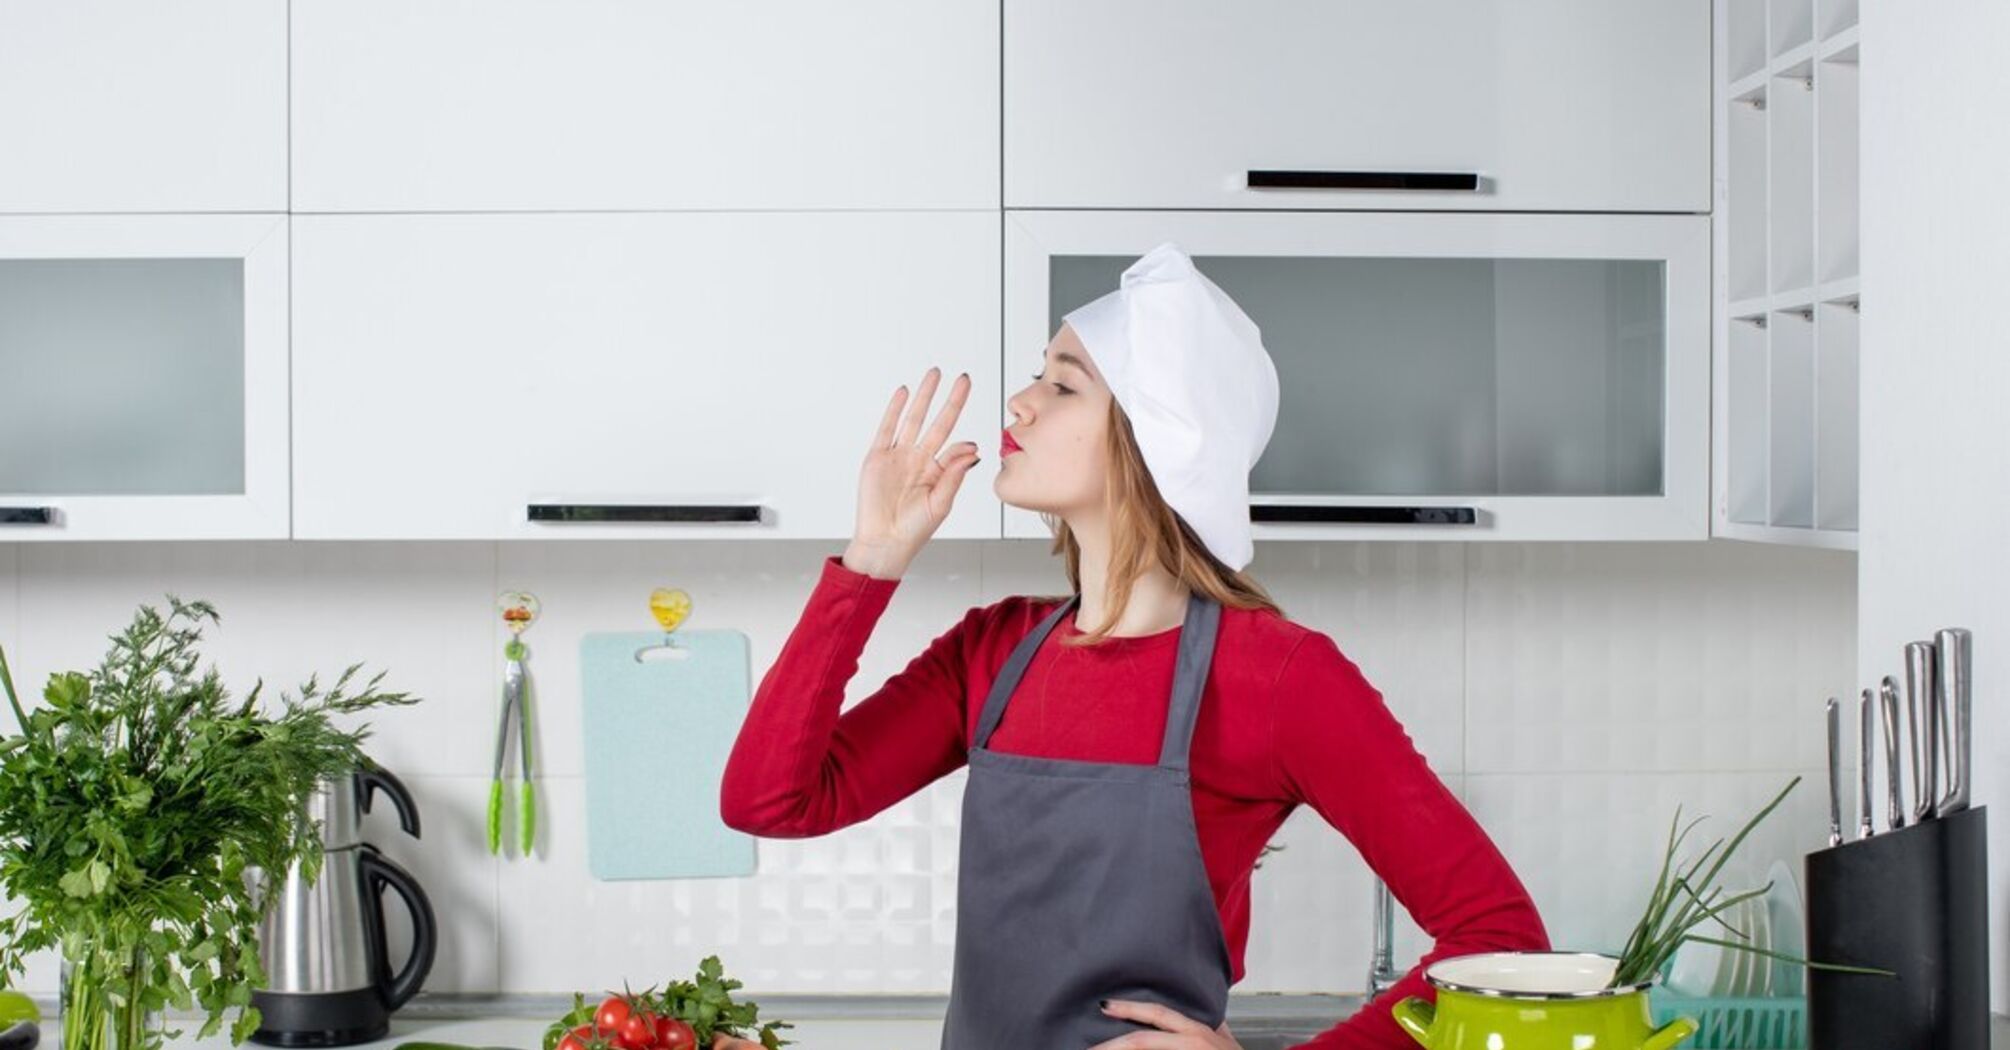 How to get rid of an unpleasant odor in the kitchen: 4 tips to help